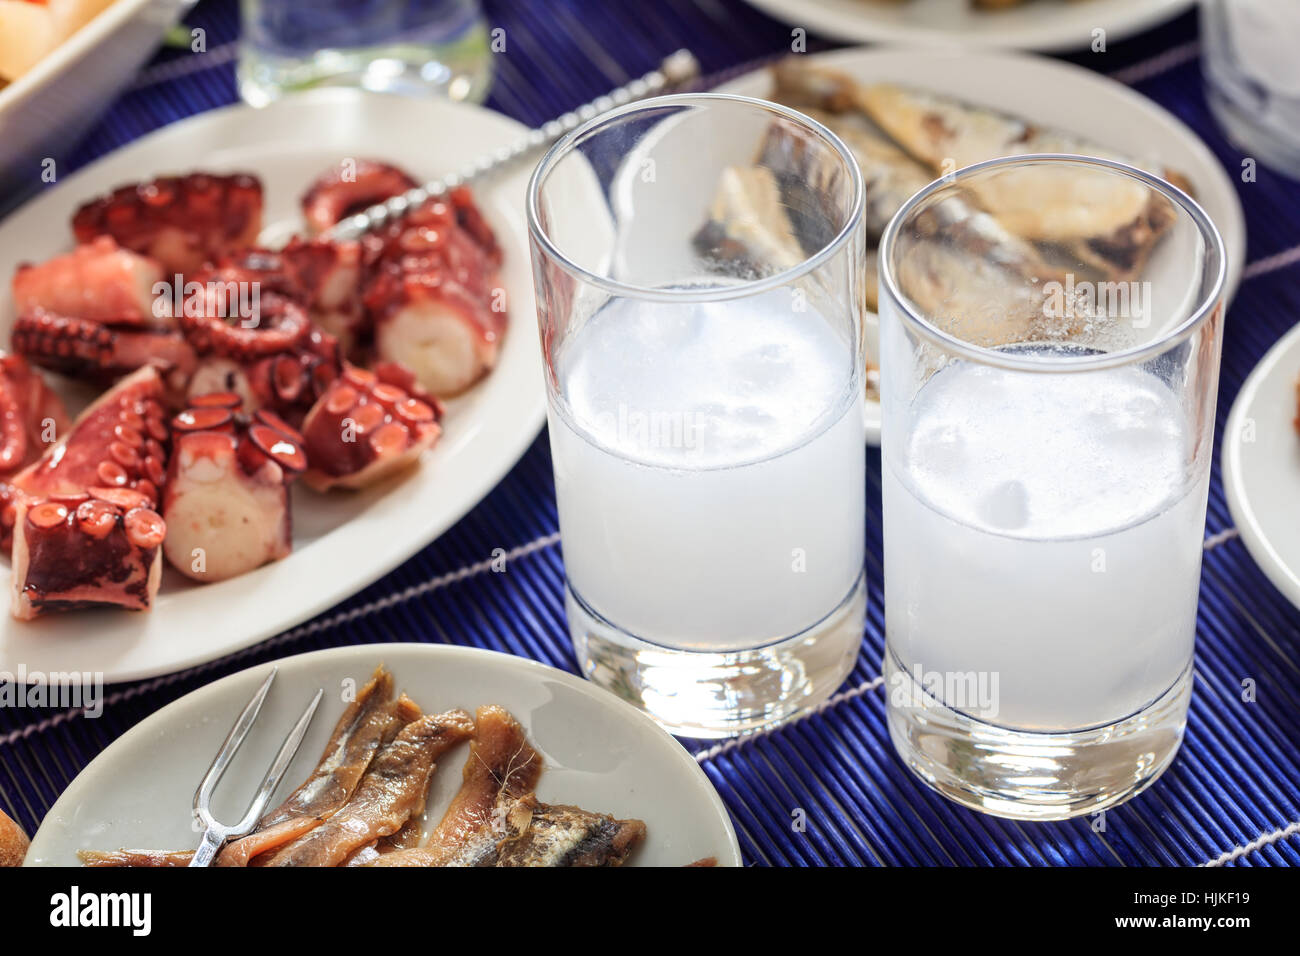 Glasses of ouzo and appetizers Stock Photo